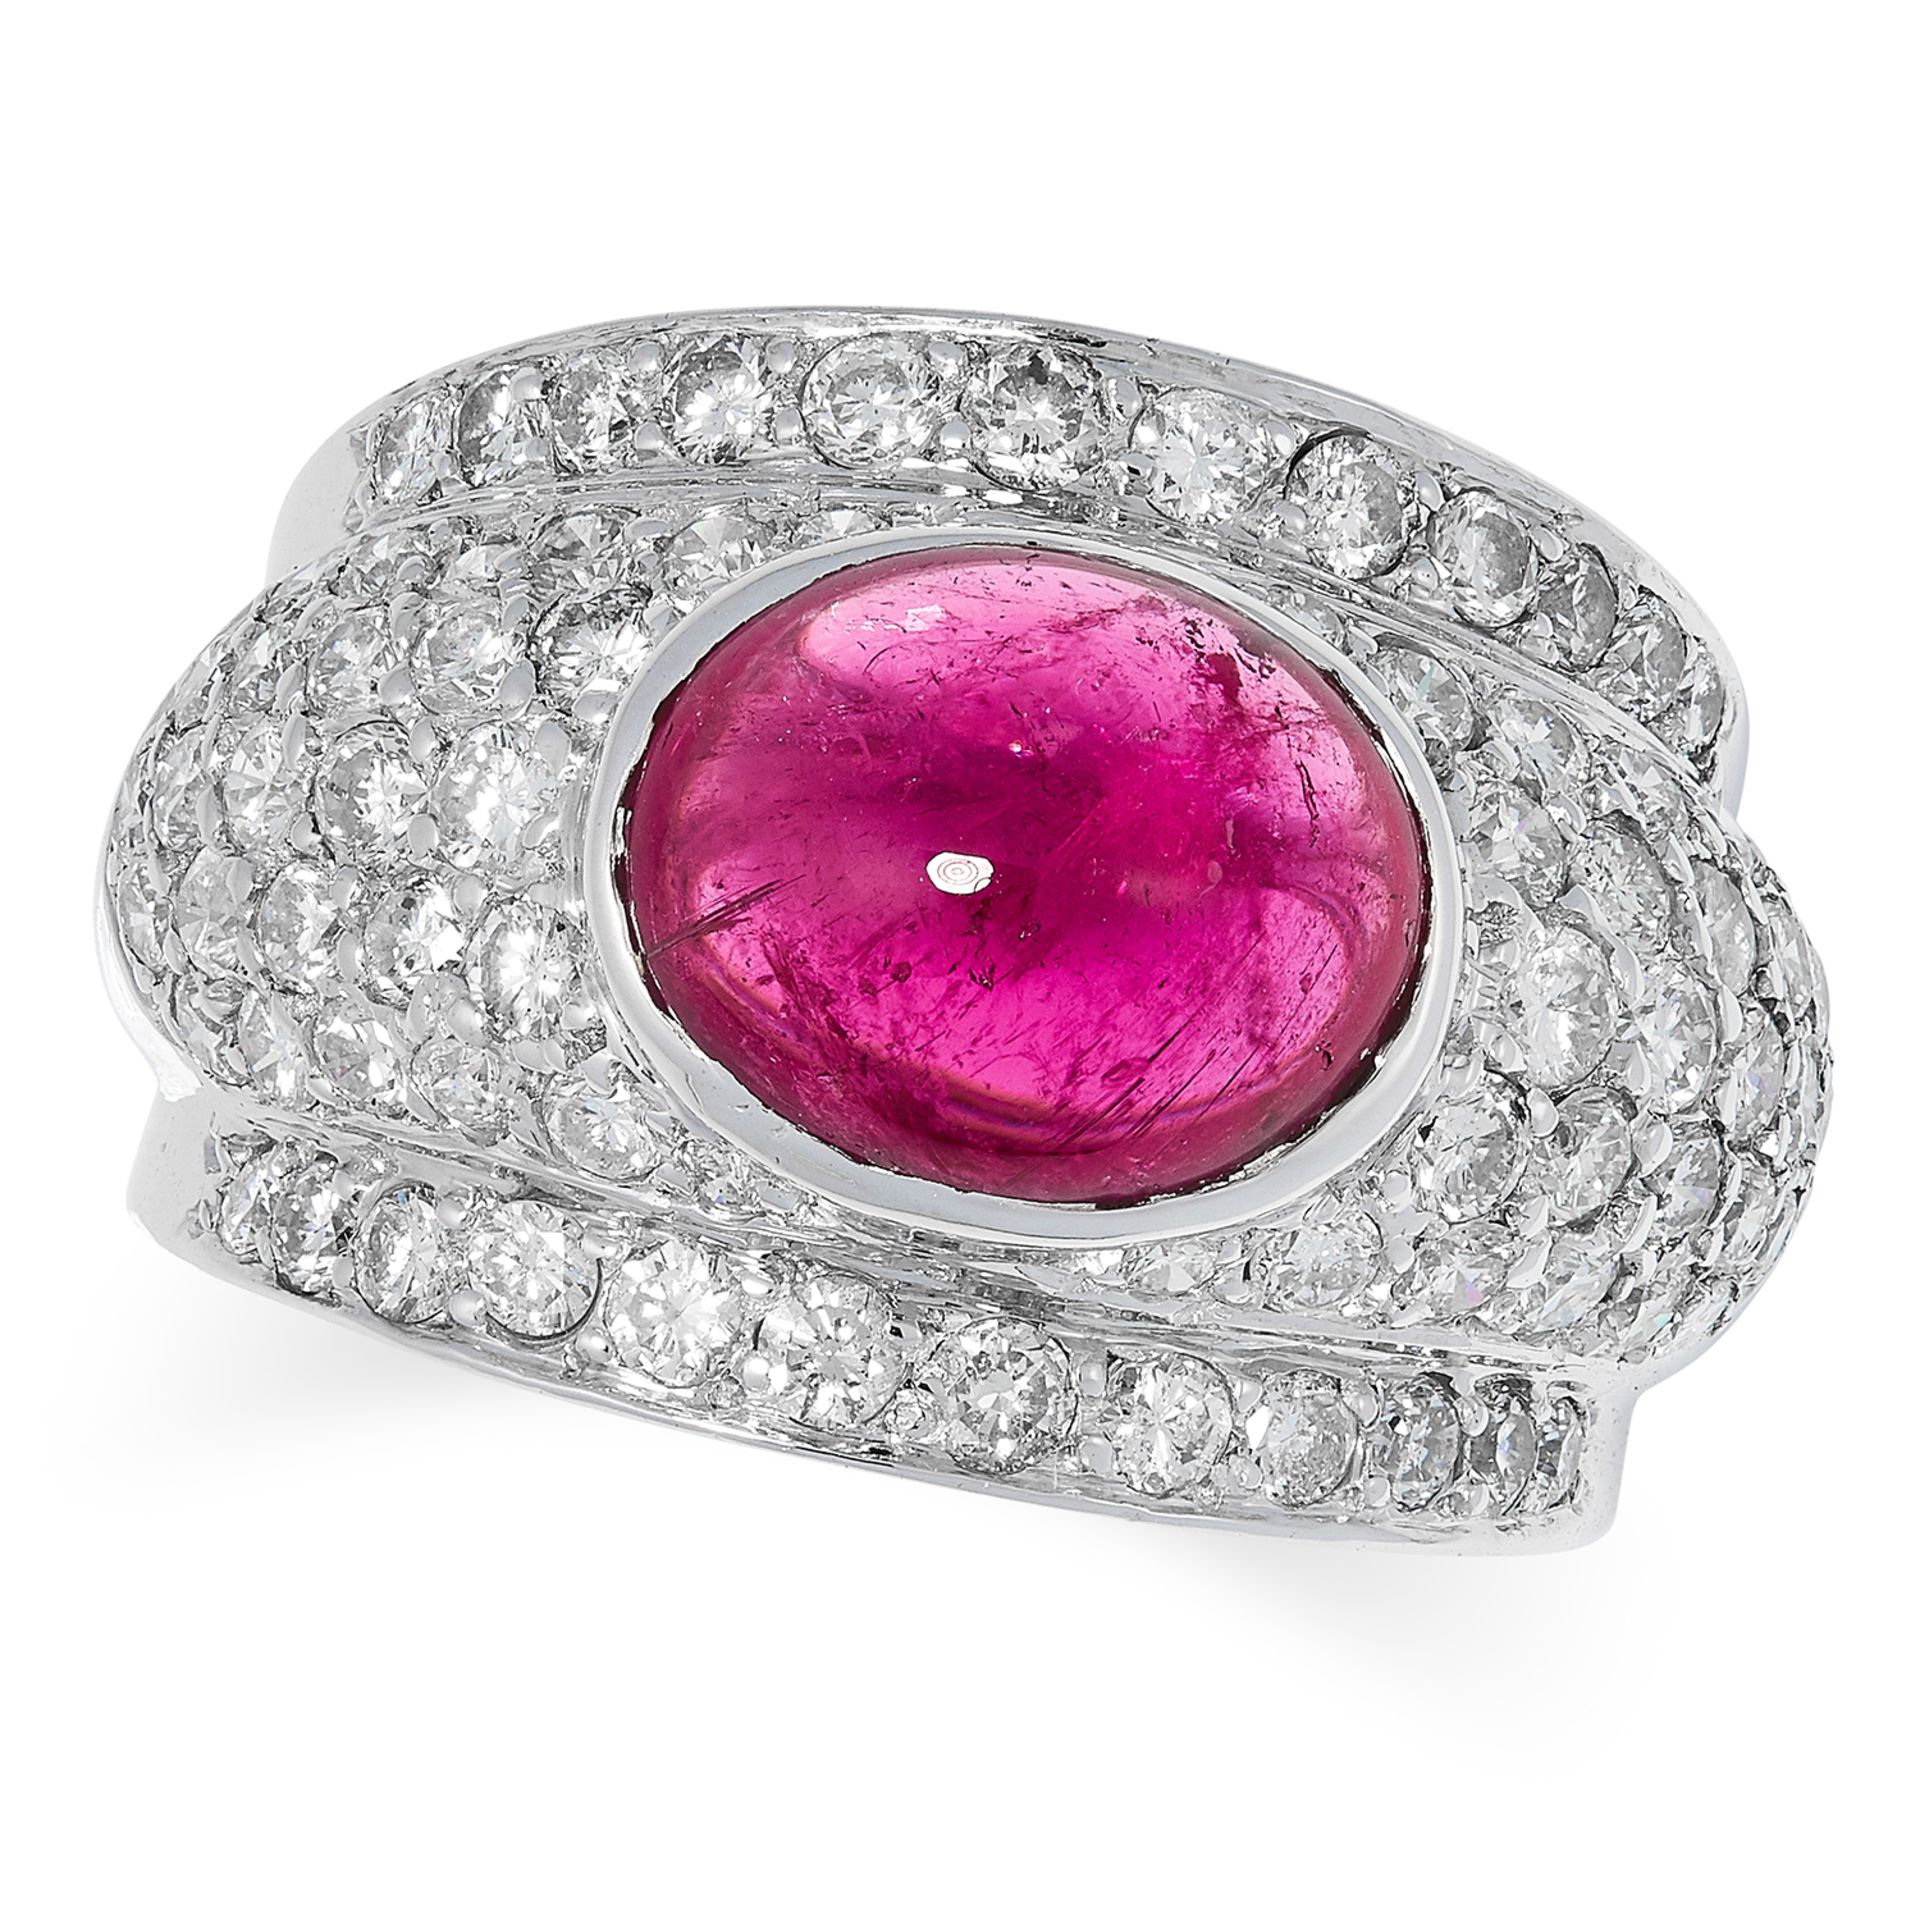 A PINK TOURMALINE AND DIAMOND RING set with an oval cut pink tourmaline in a surround of round cut